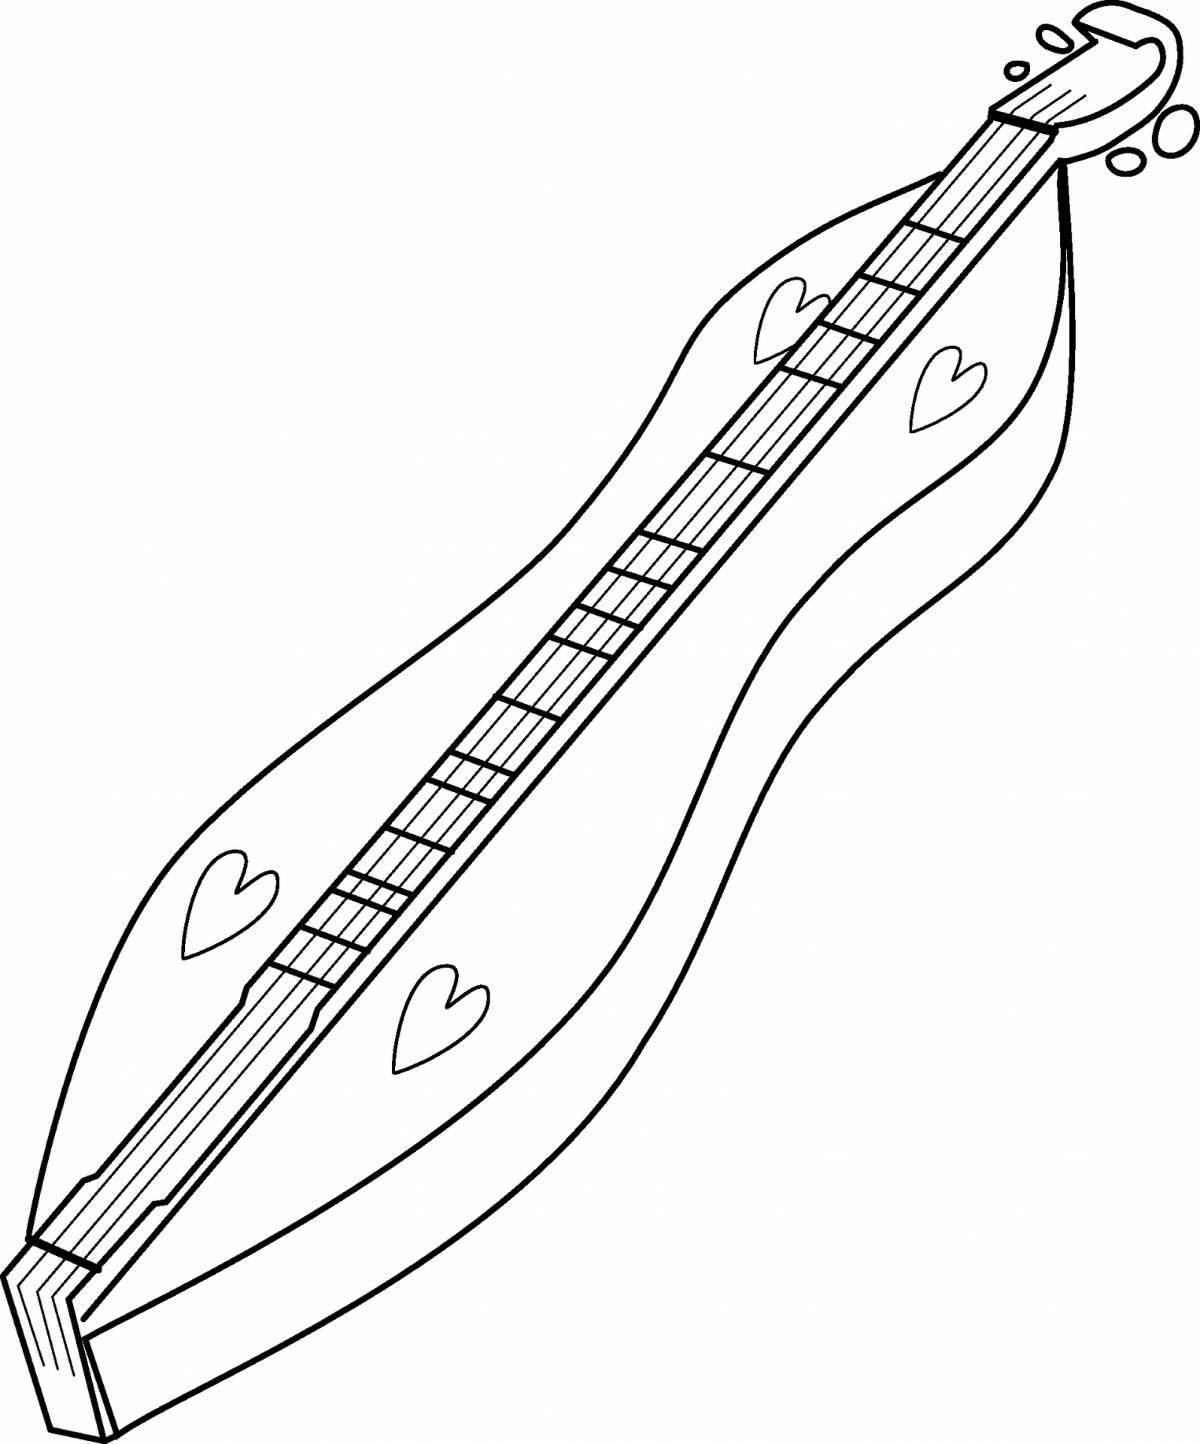 Artistic drawing of a harp